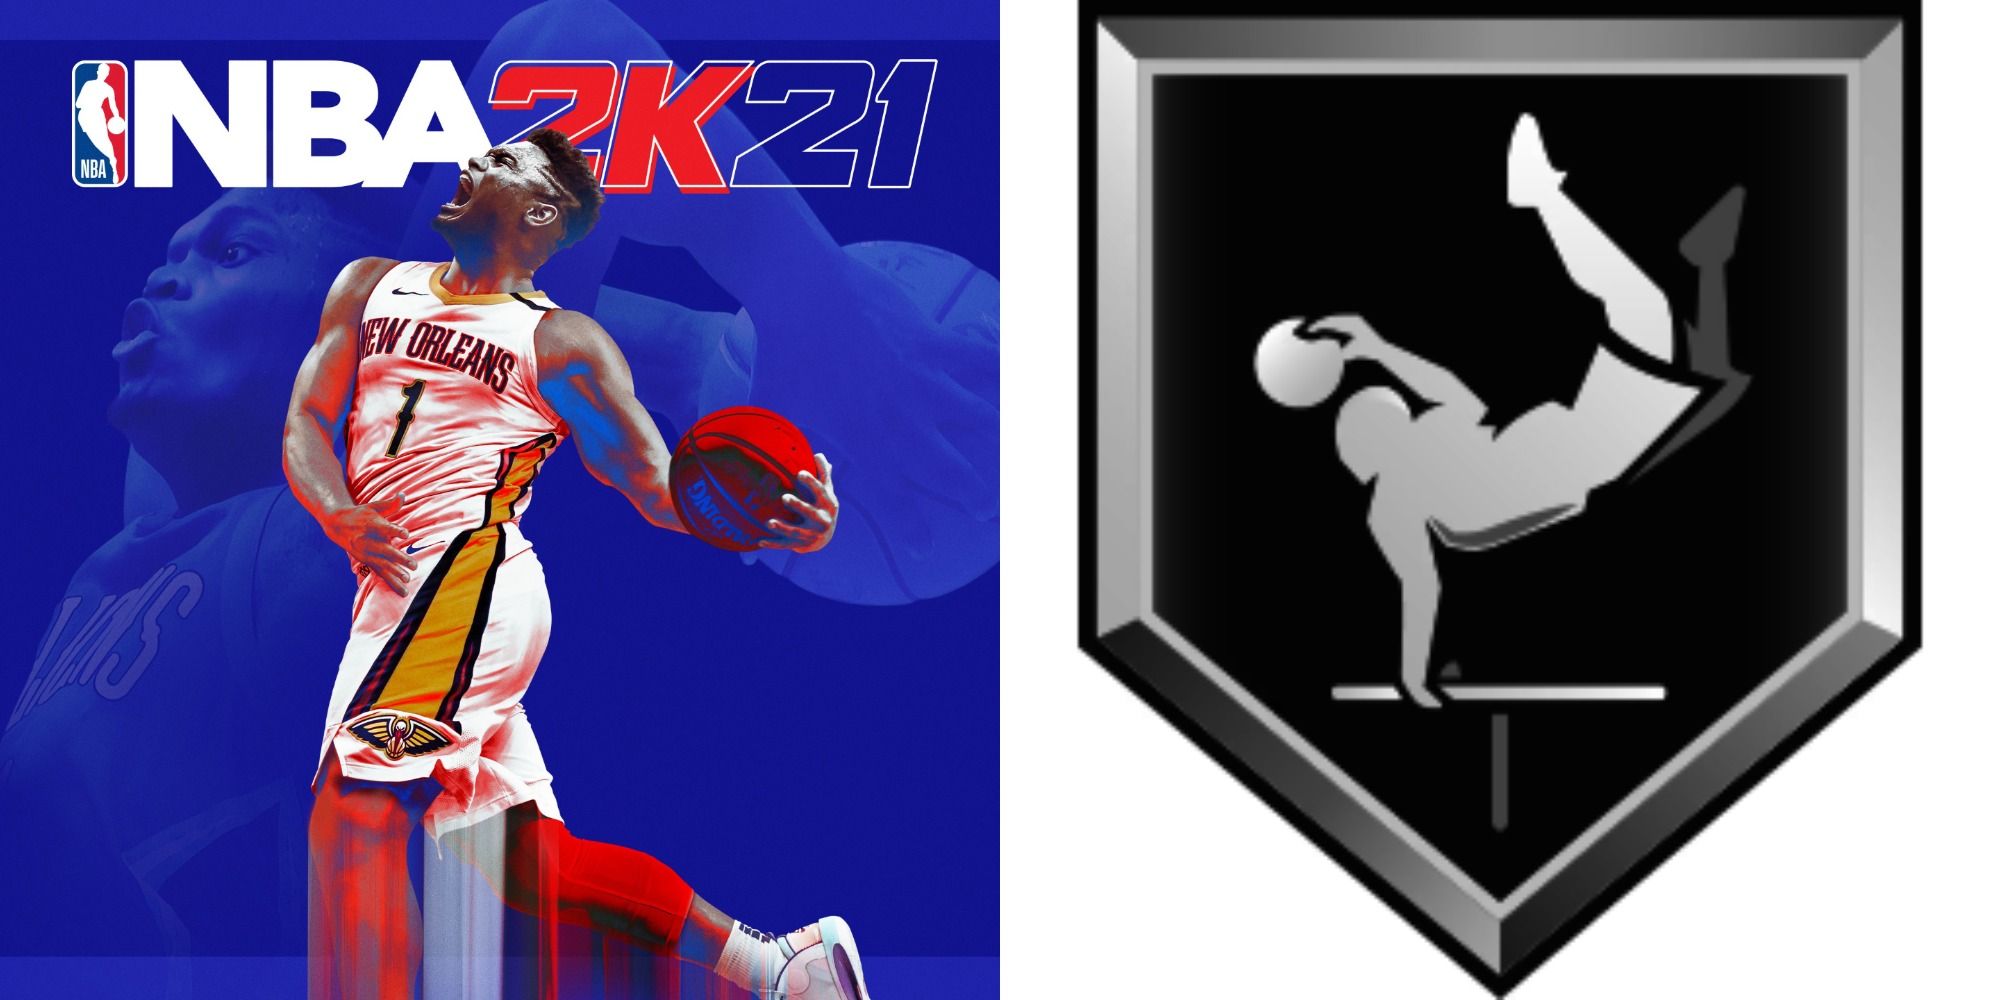 A split image of the NBA 2K21 cover and the game badge